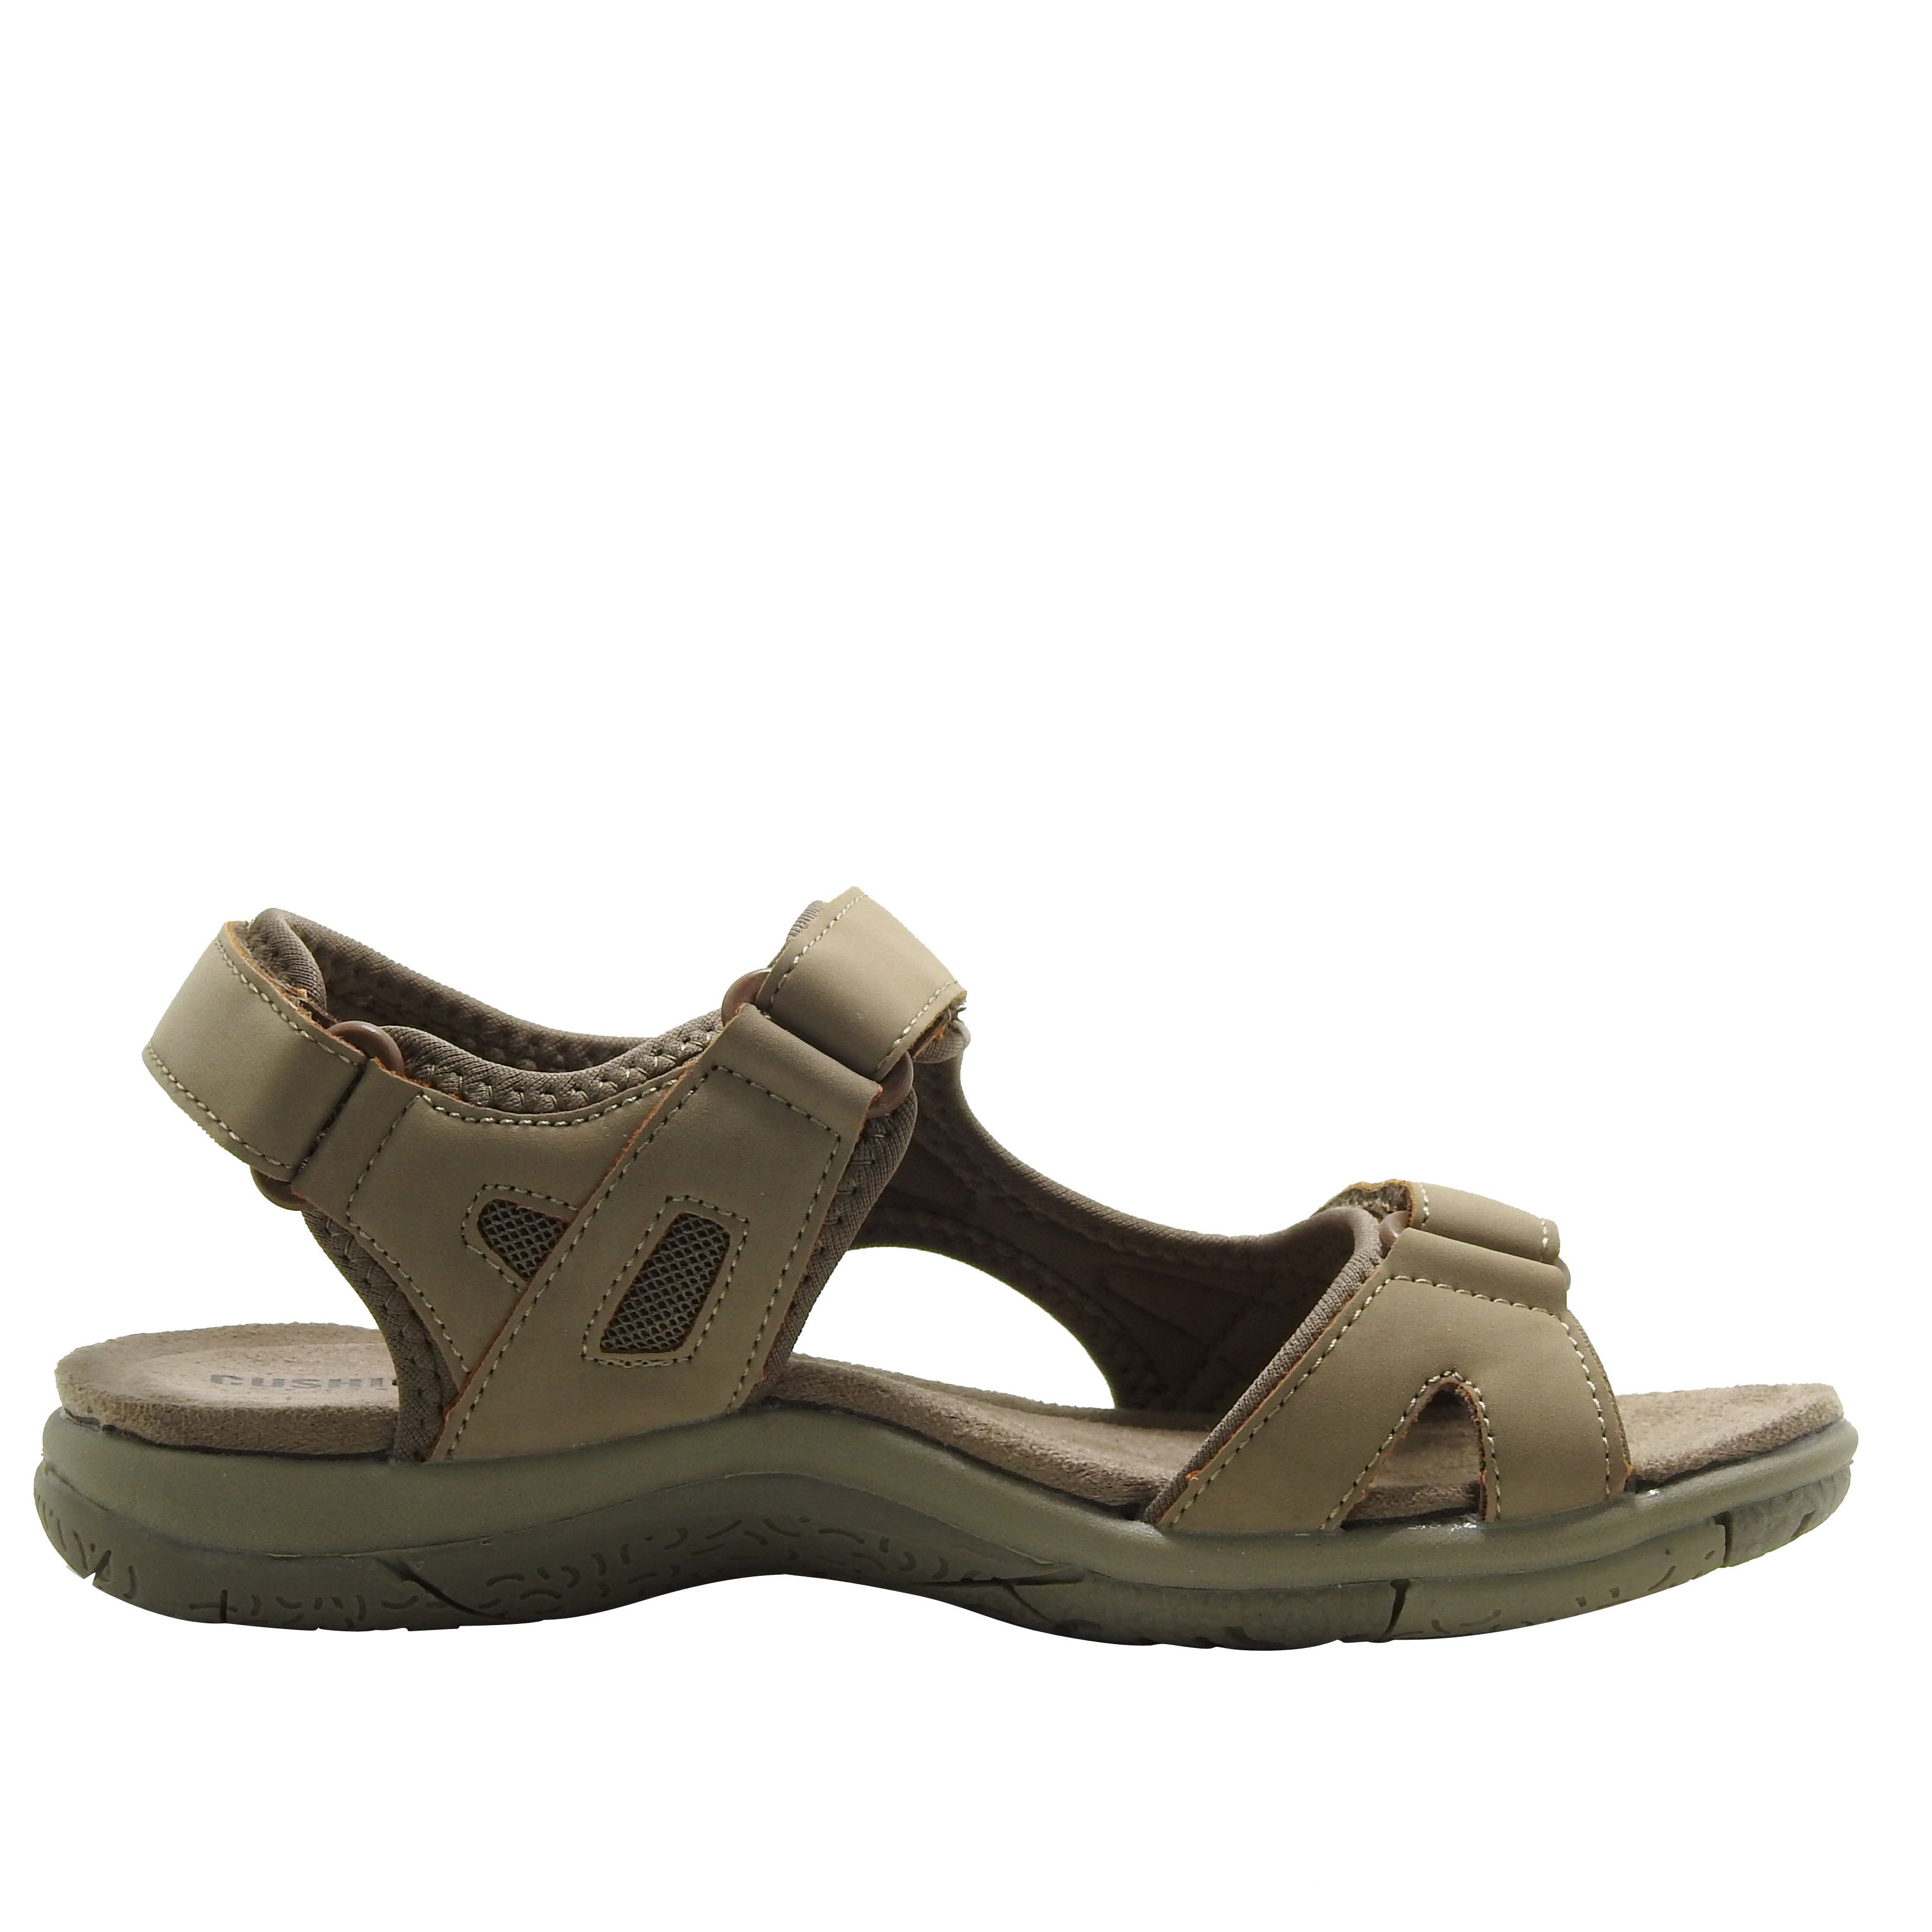 Pace Comfort Sandal Brights